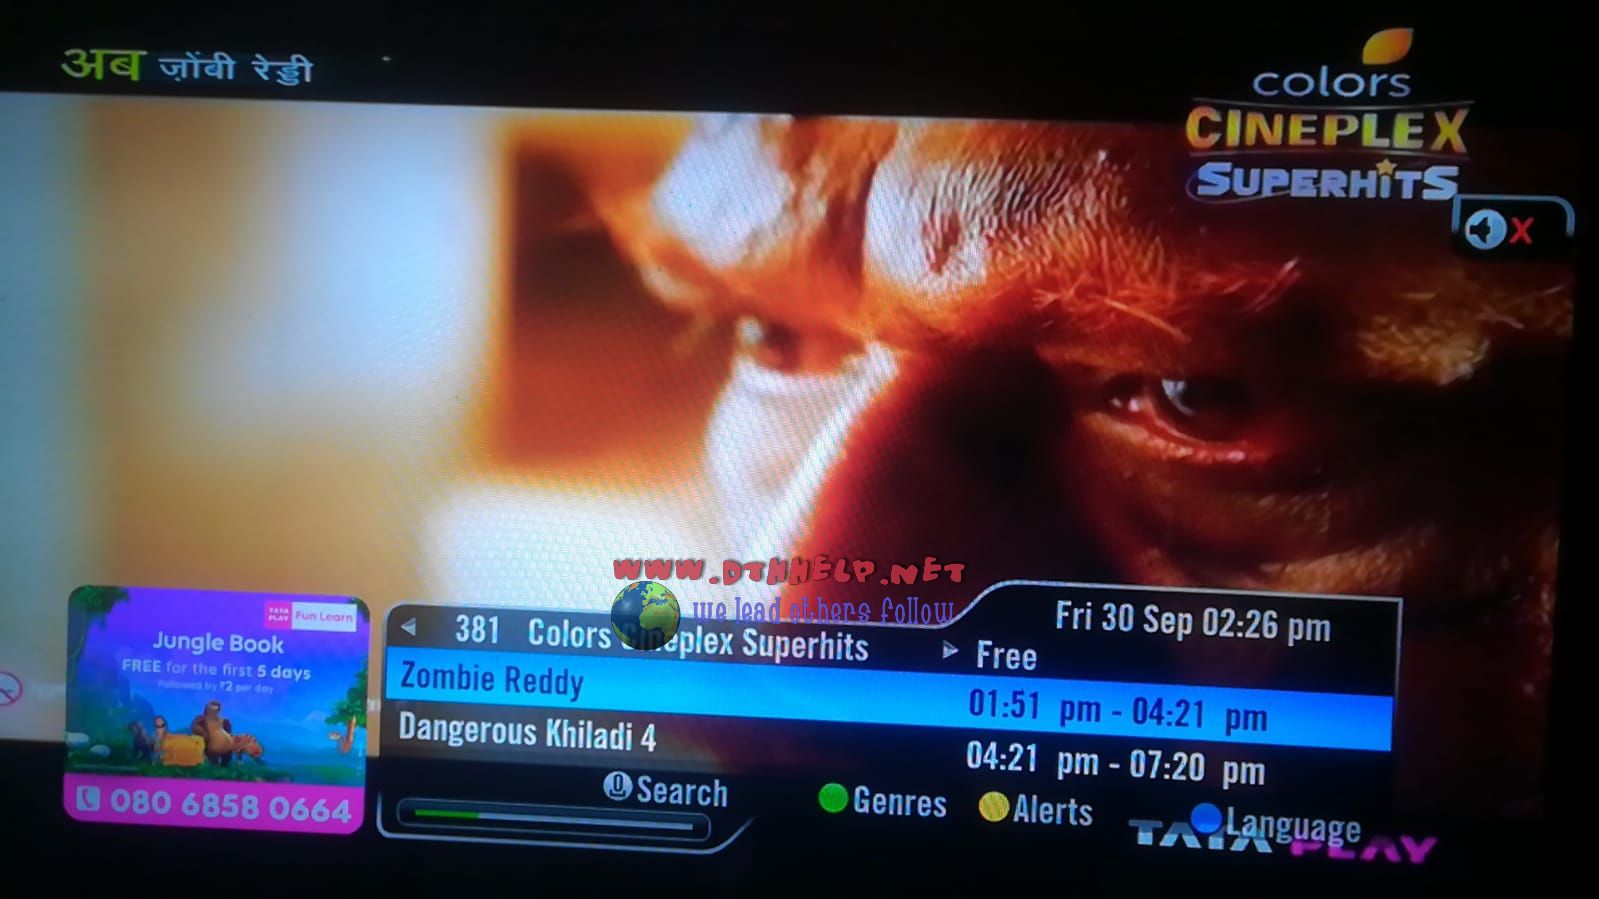 colors cineplex superhits added on tataky